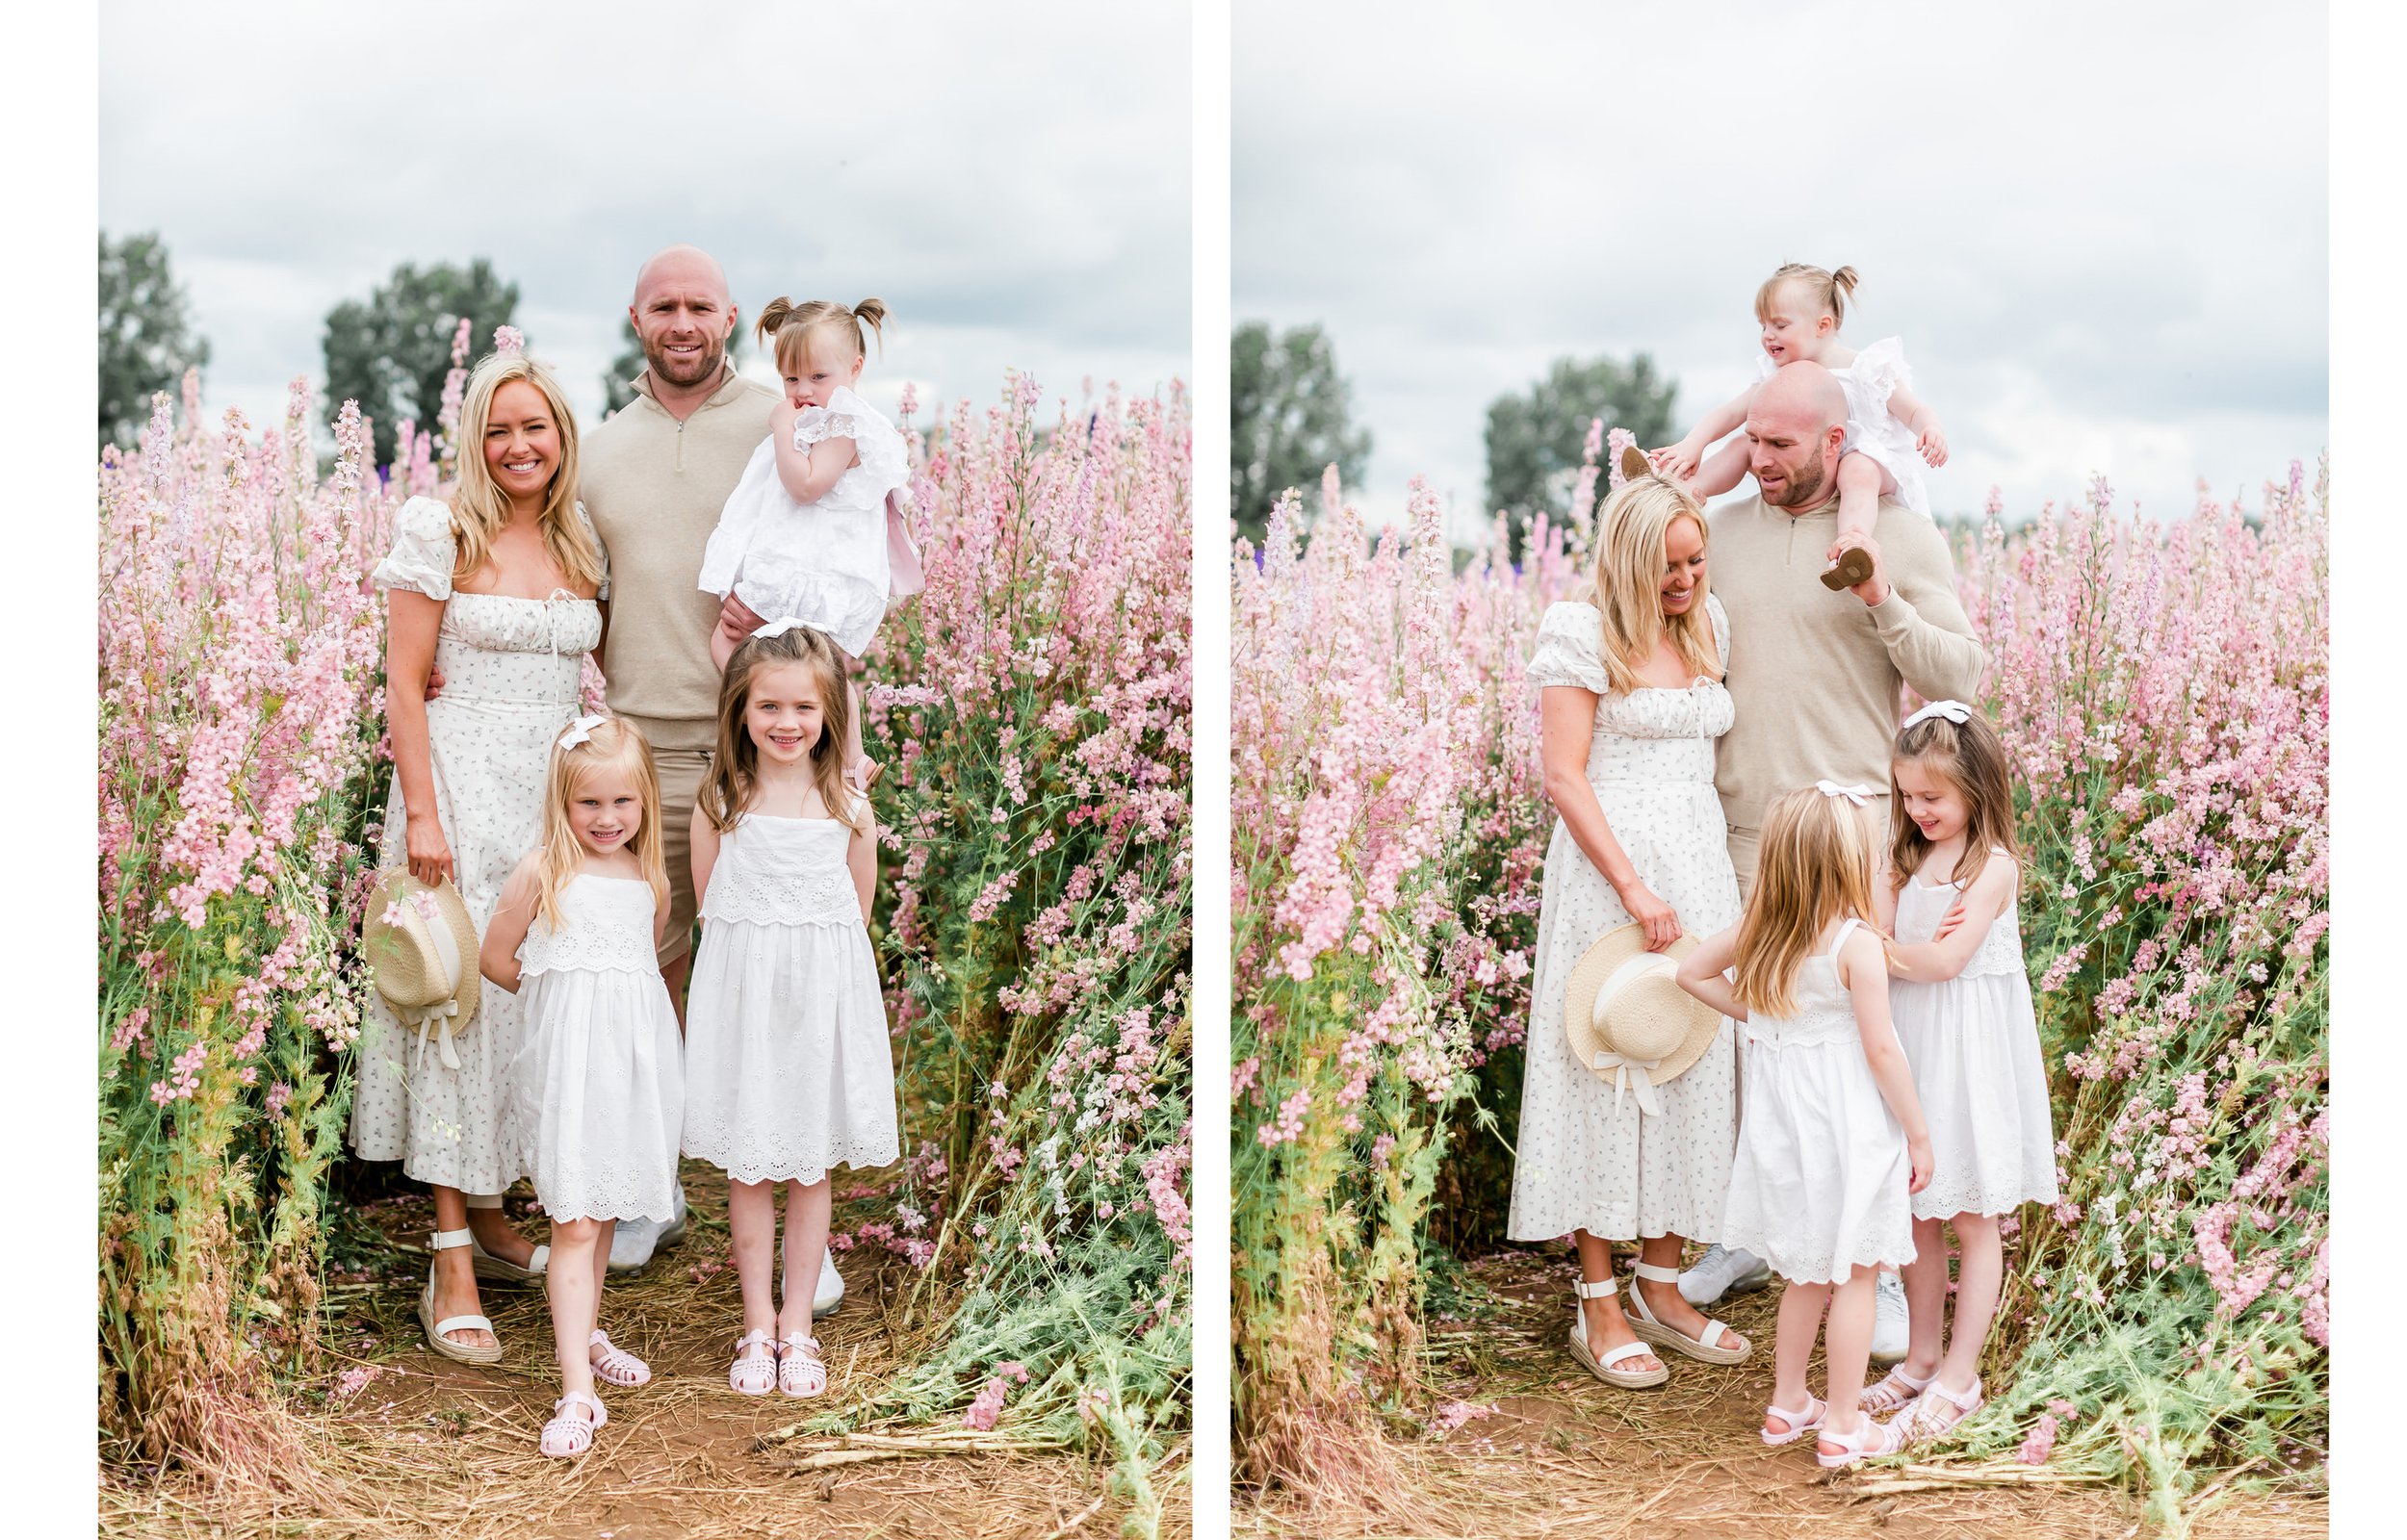 Confetti_fields_Iris_and_ivy_family_photography-2.jpg